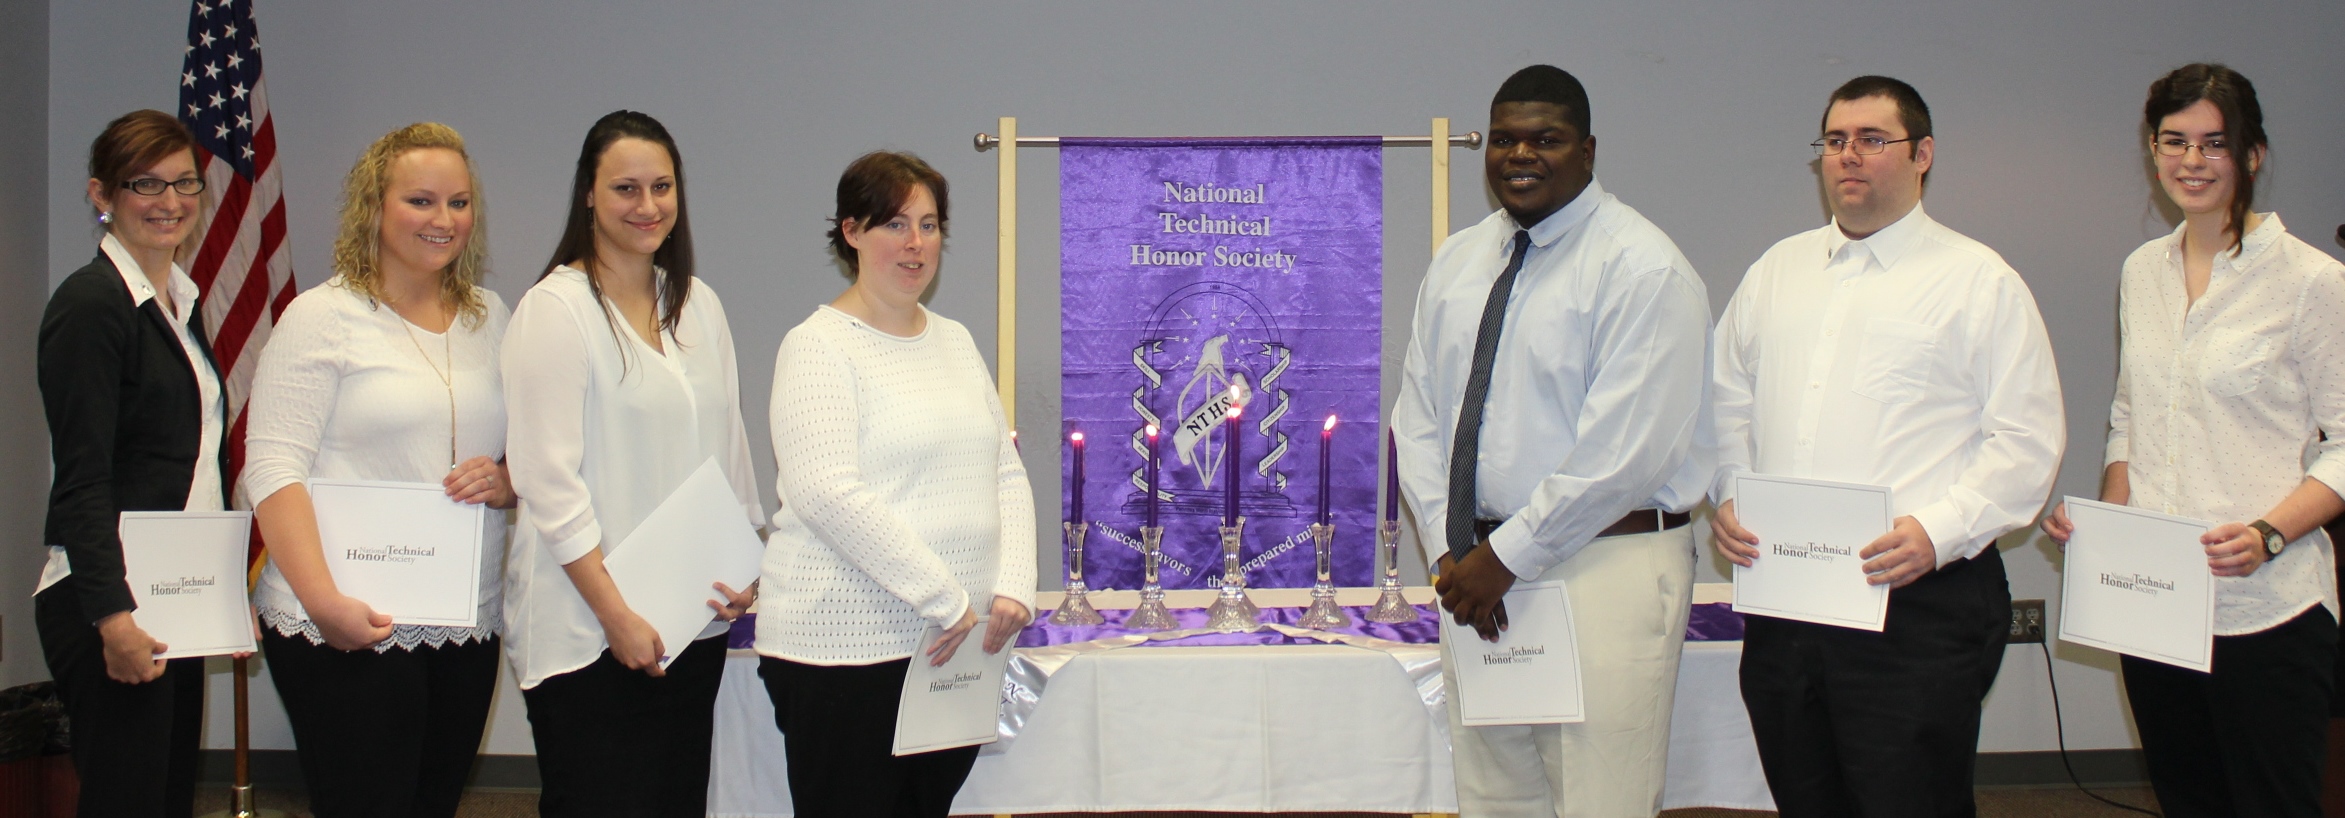 NTHS Induction - December 2015